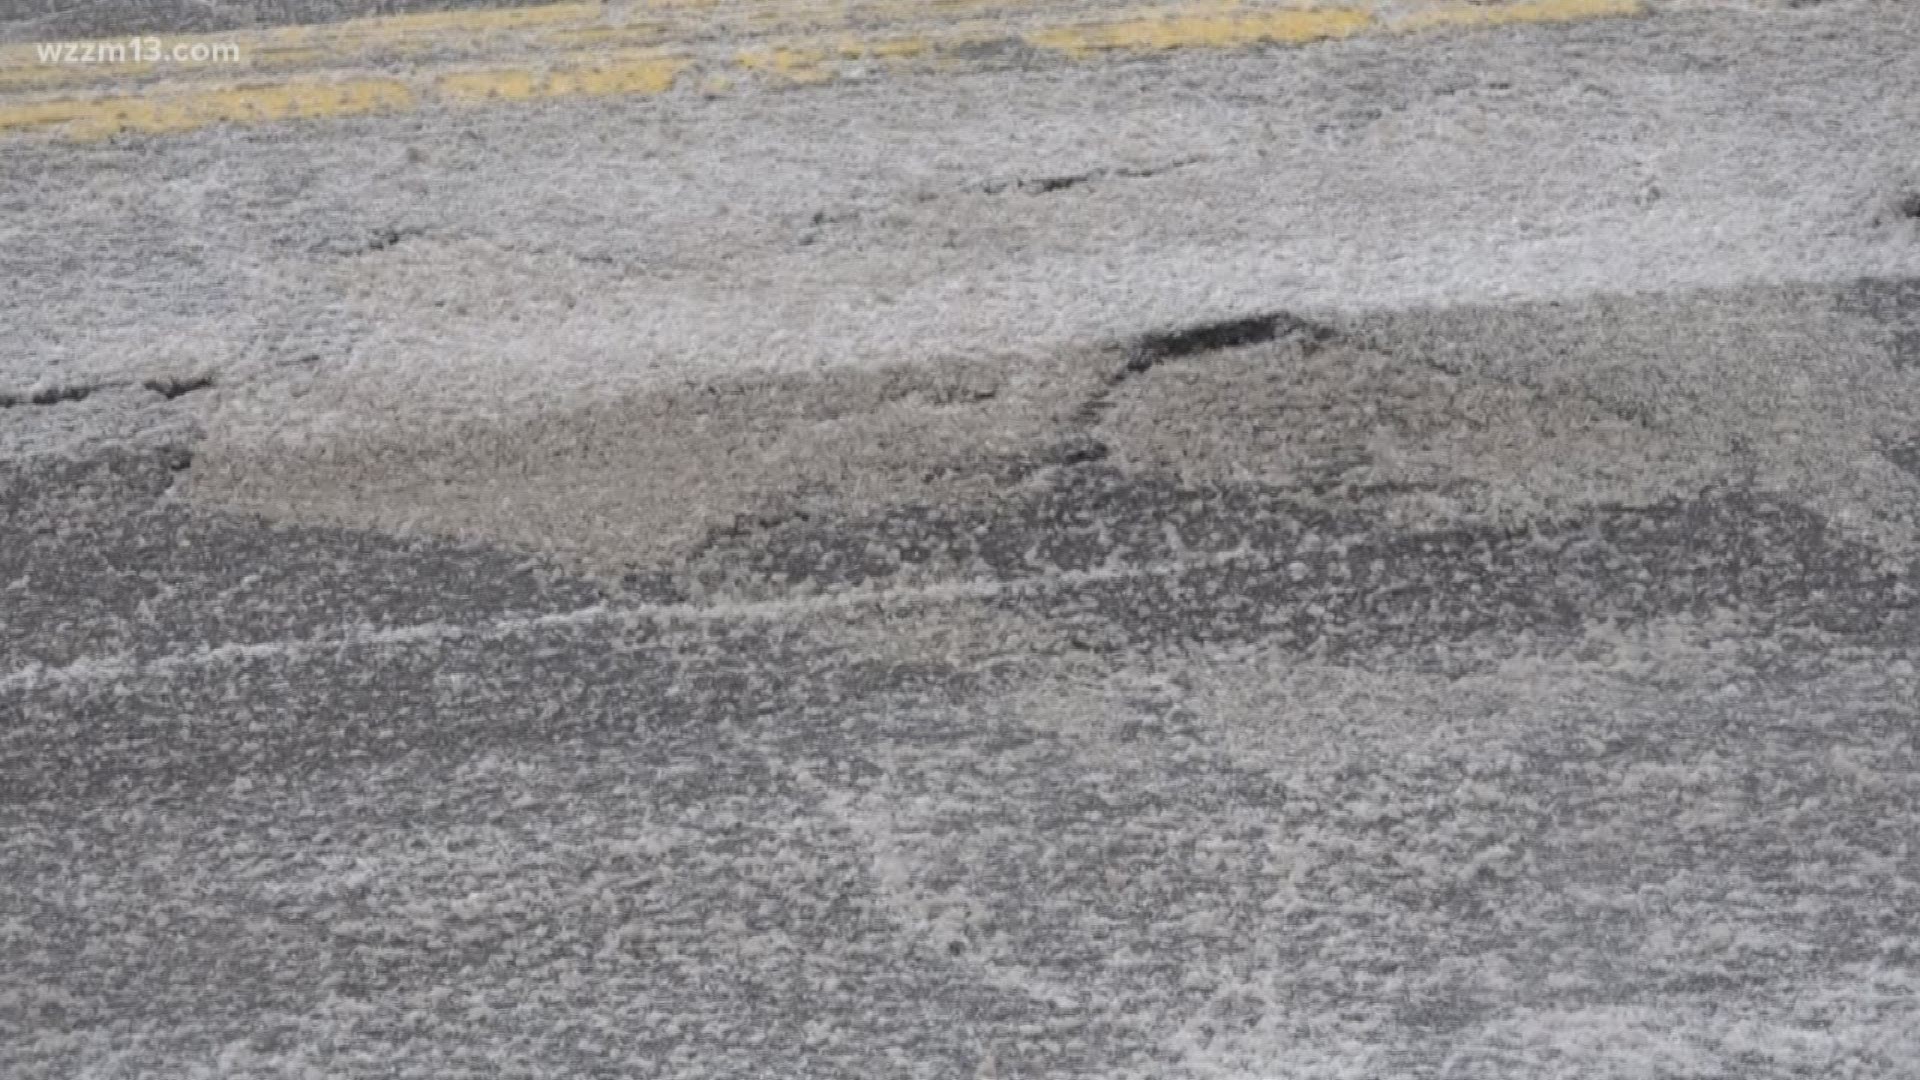 Study:Michigan has the worst roads in the country